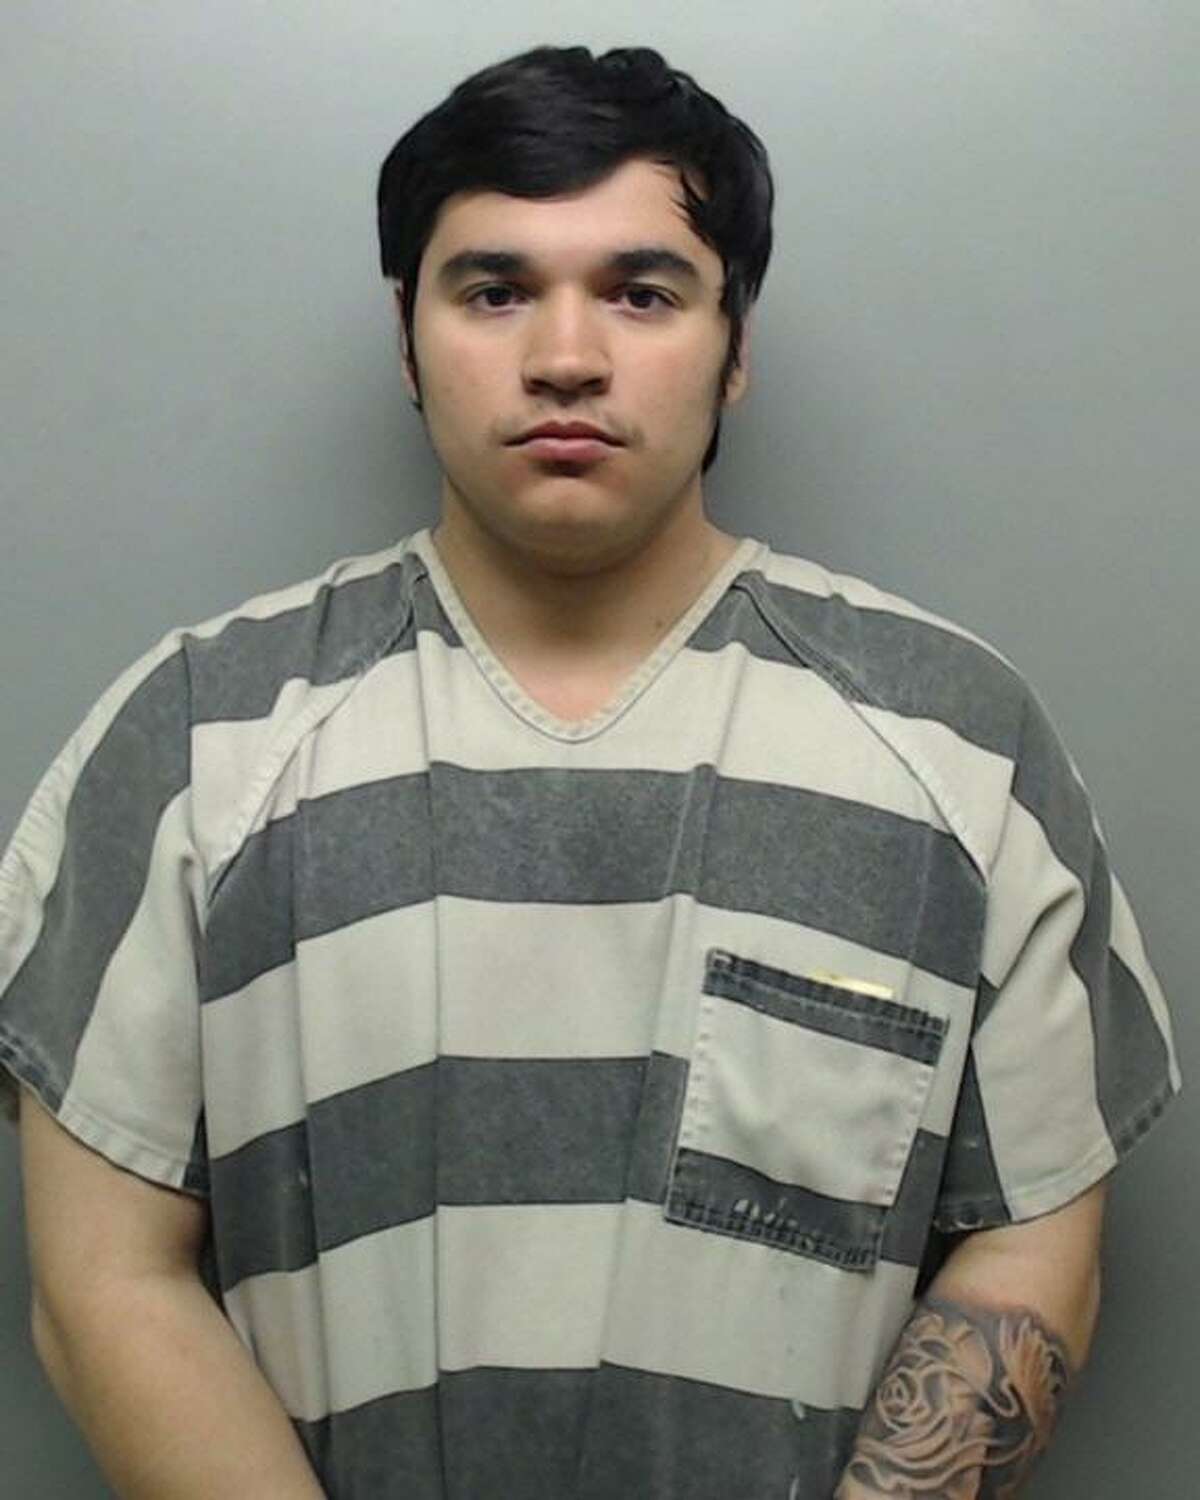 David Romeo Garza Jr., 21, was arrested and charged with manslaughter.